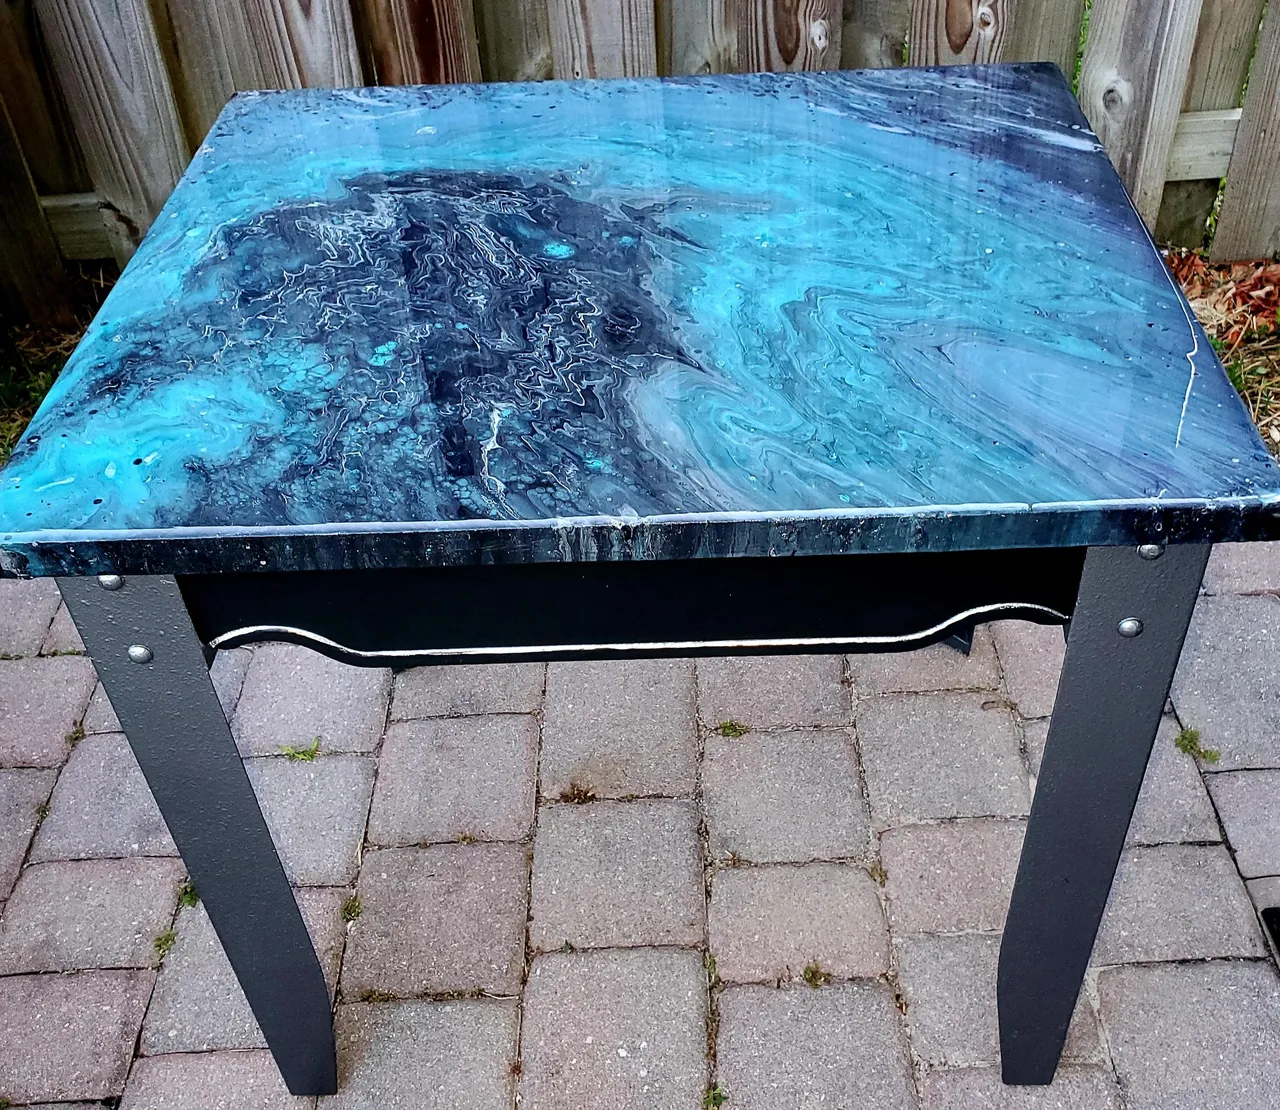 A table with blue and black marble on top.